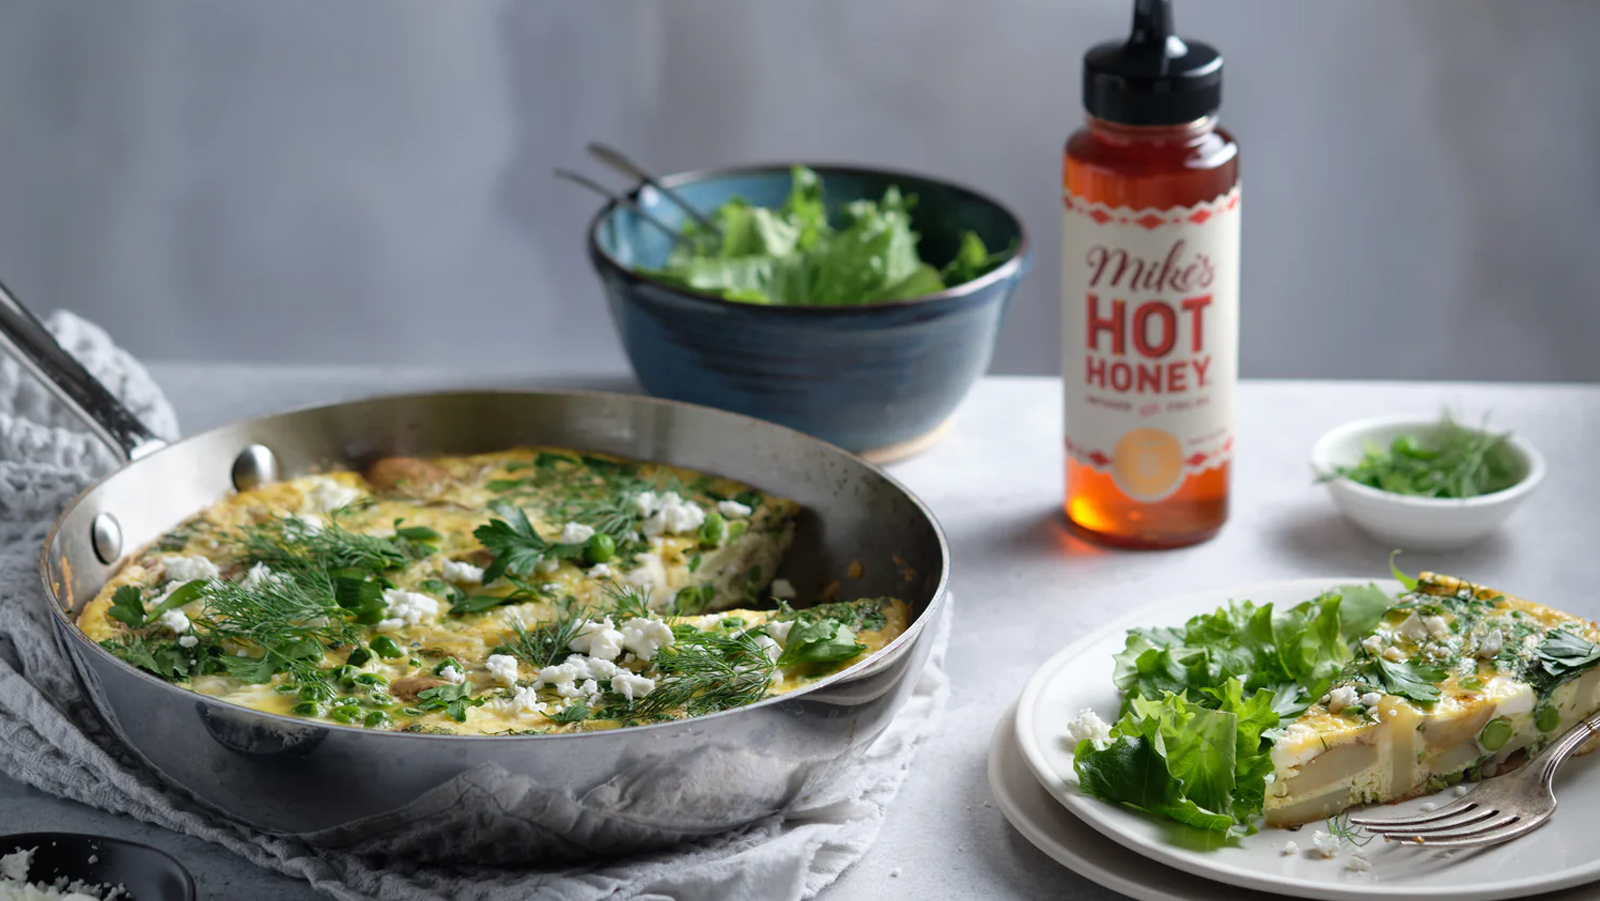 Herb Frittata with hot honey